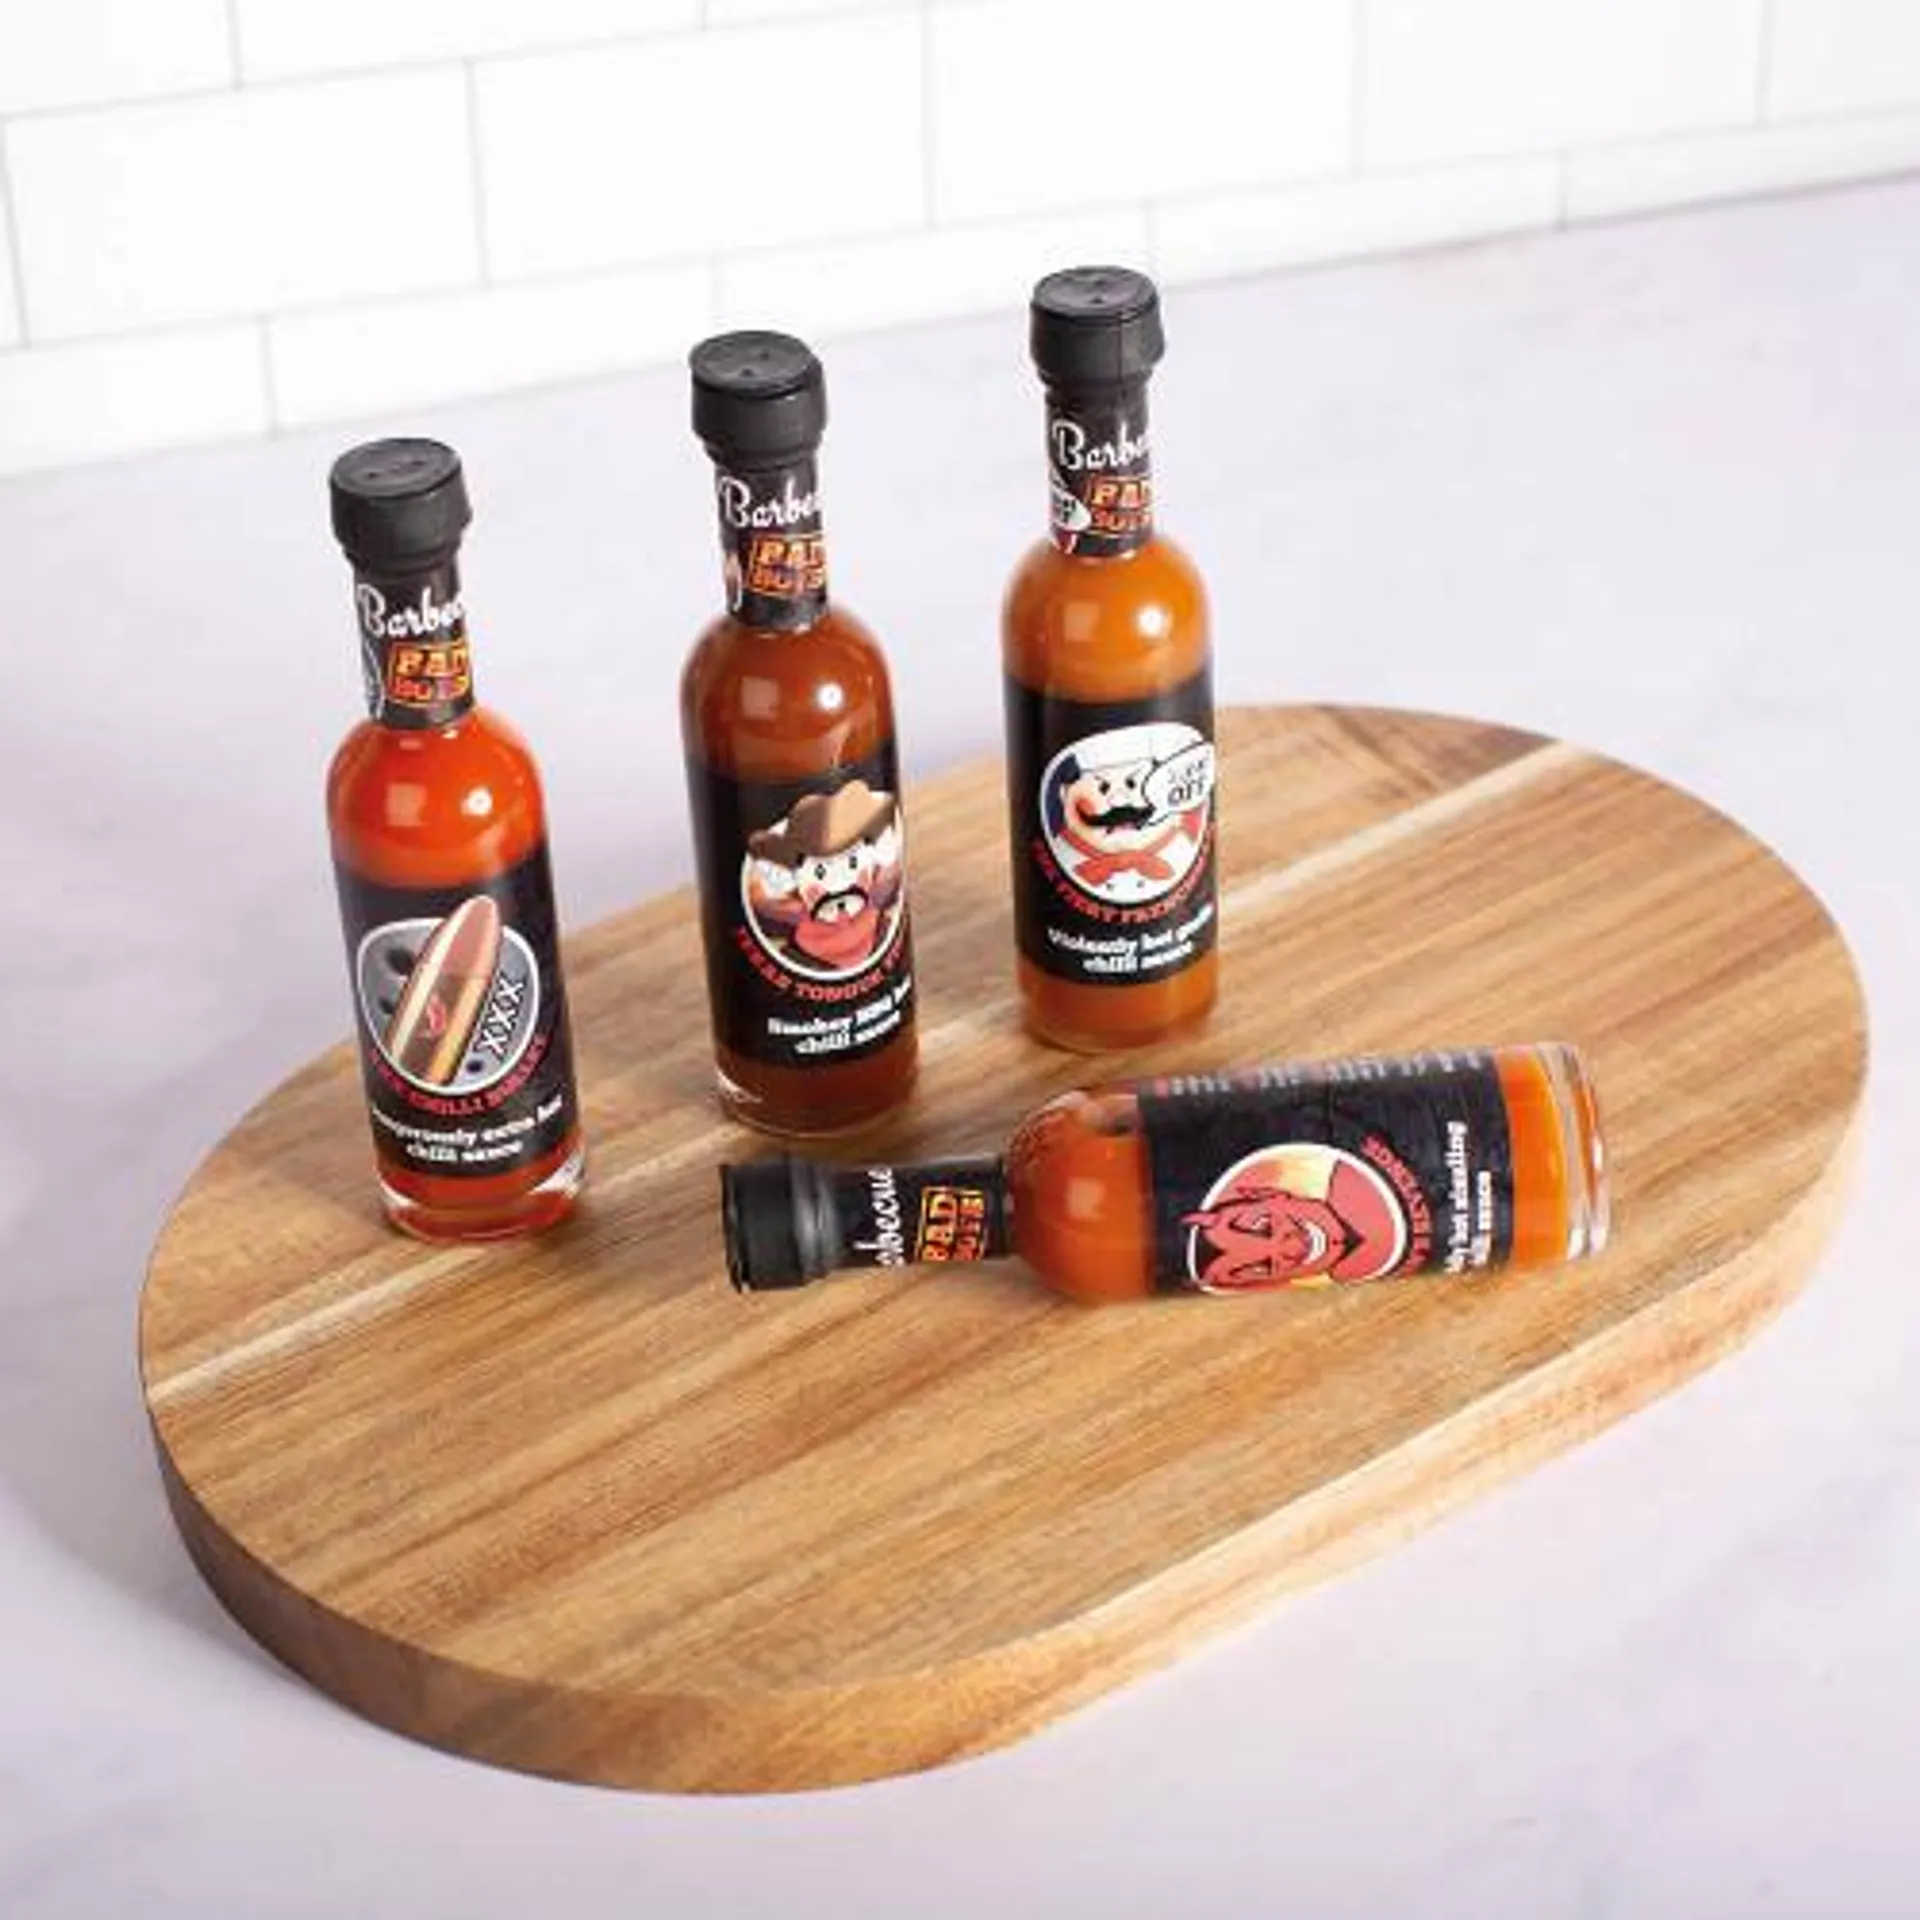 Barbecue Bad Boys Sauce Selection – 4 Hot Sauces